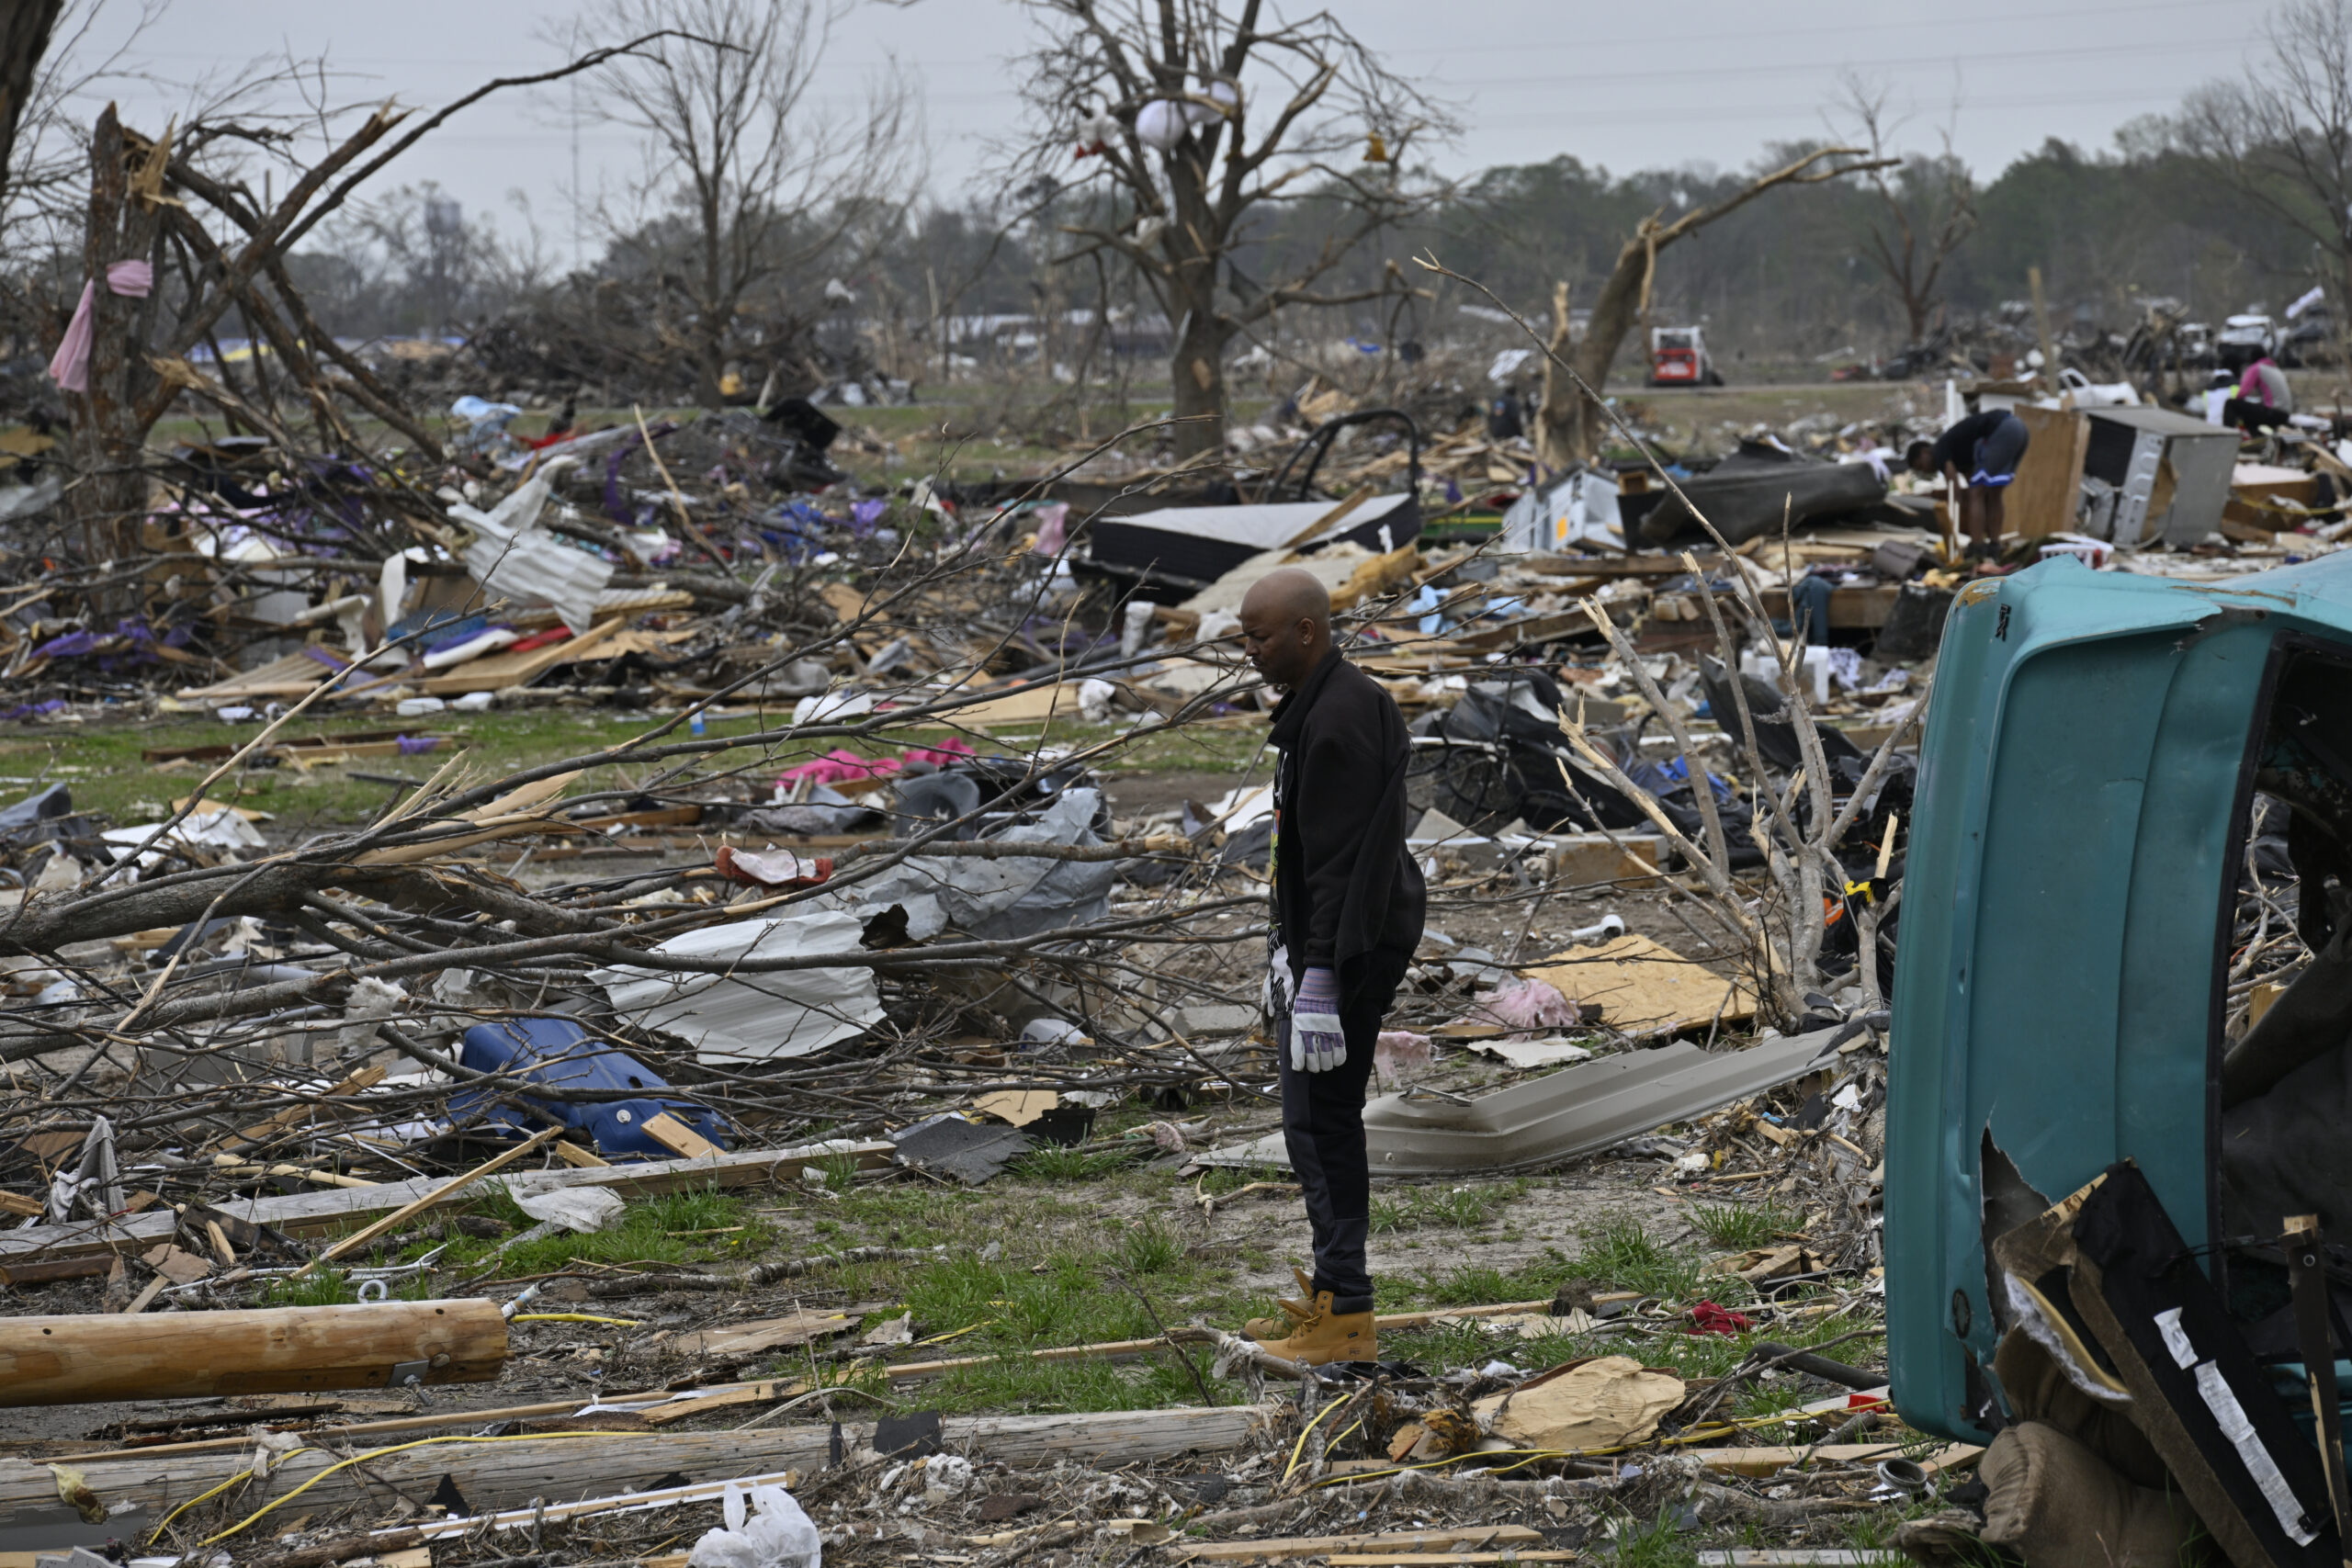 Deadly Tornadoes, Storms Ravage Midwest; Concert Hall’s Roof Collapses During Show